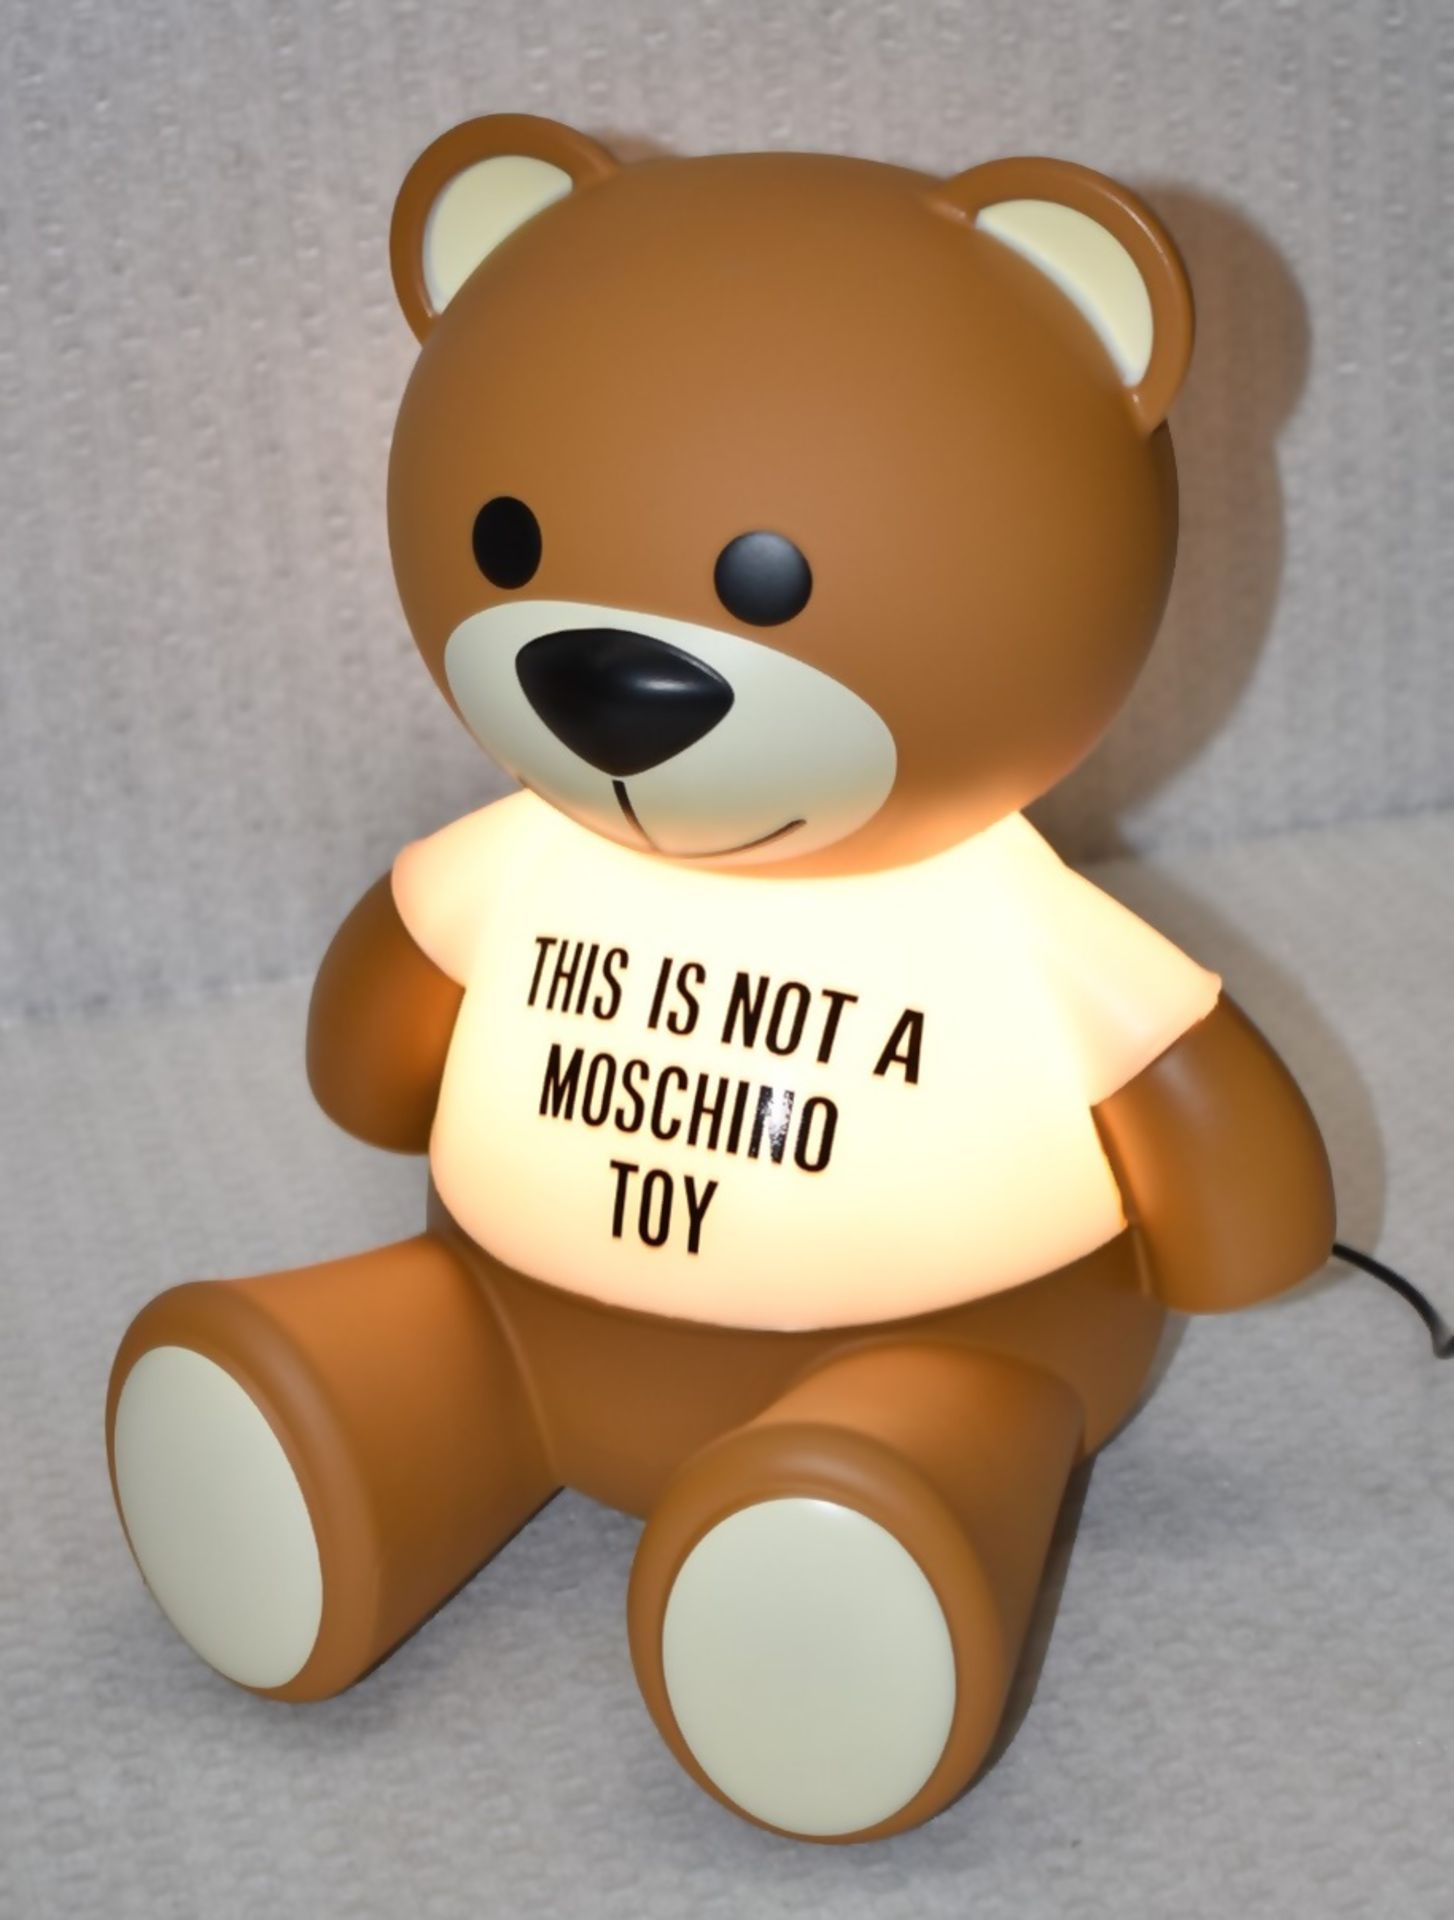 1 x KARTELL Moschino 'NOT A TOY' Designer Bear Table Lamp Light - Unused / Boxed - RRP £238.00 - Image 3 of 13